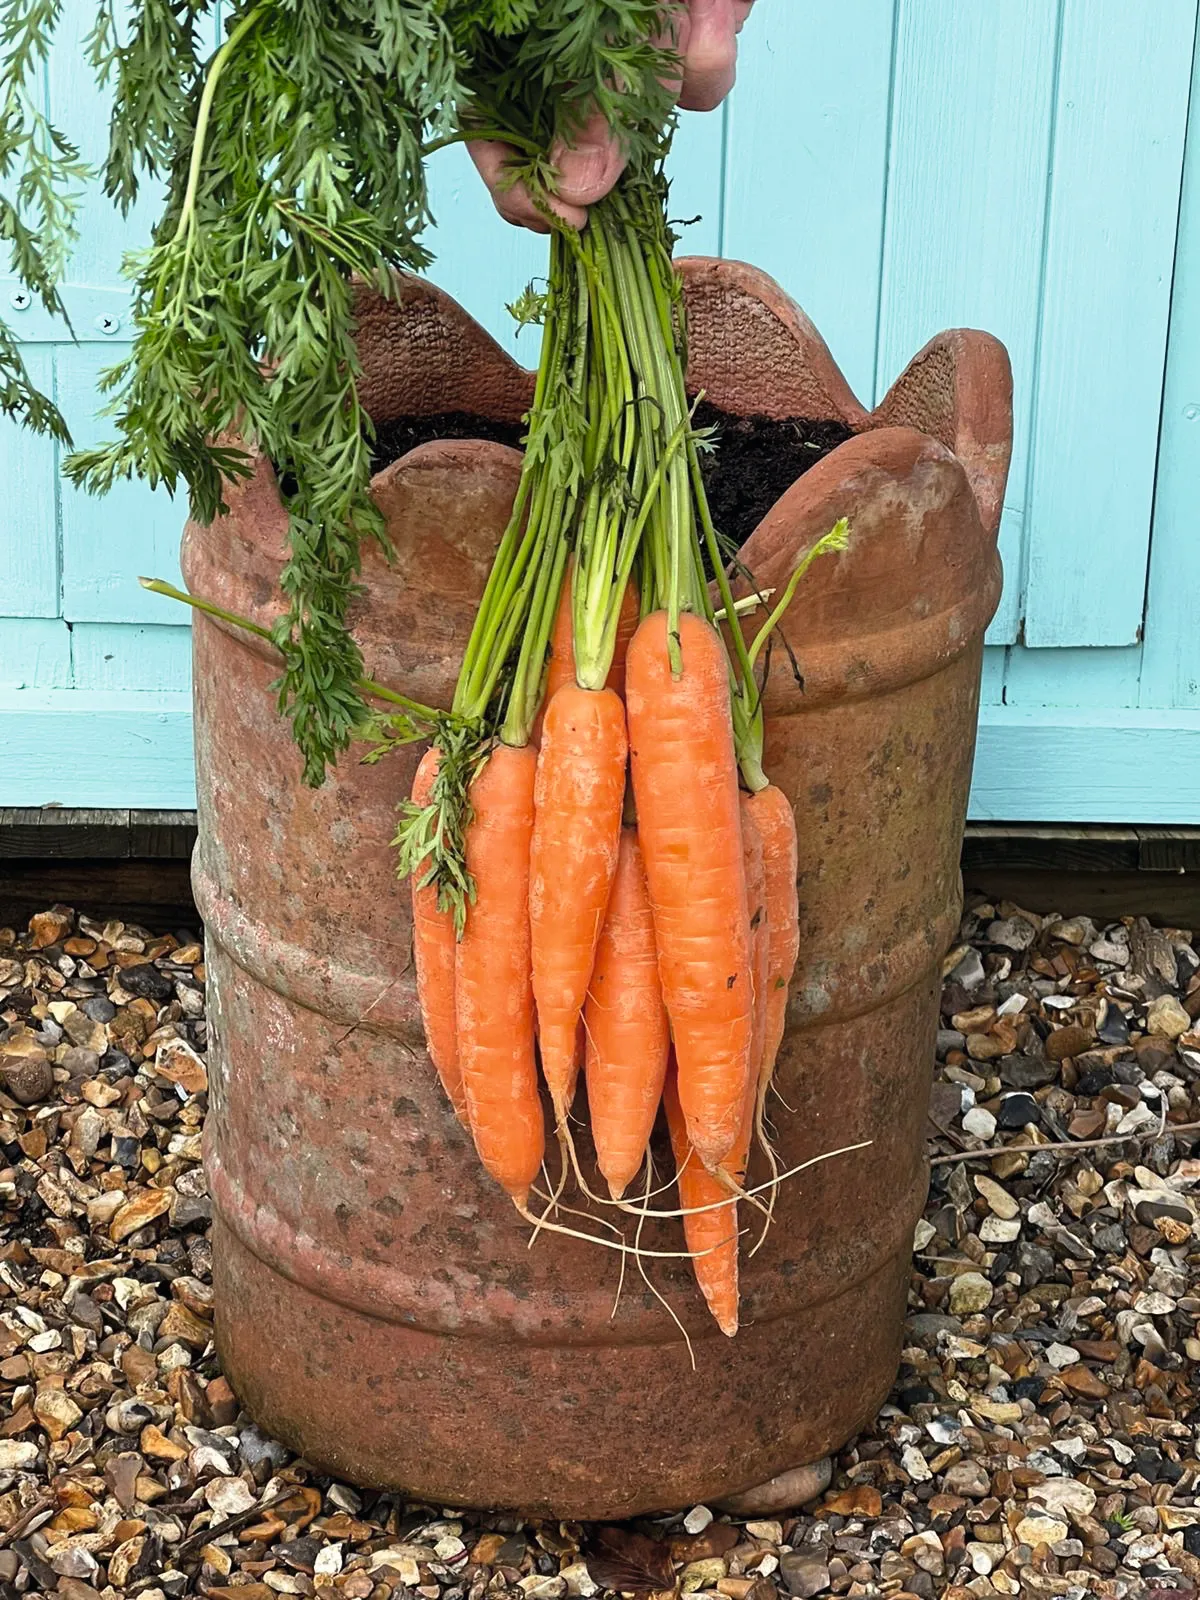 Straight carrots grown in chimney pot